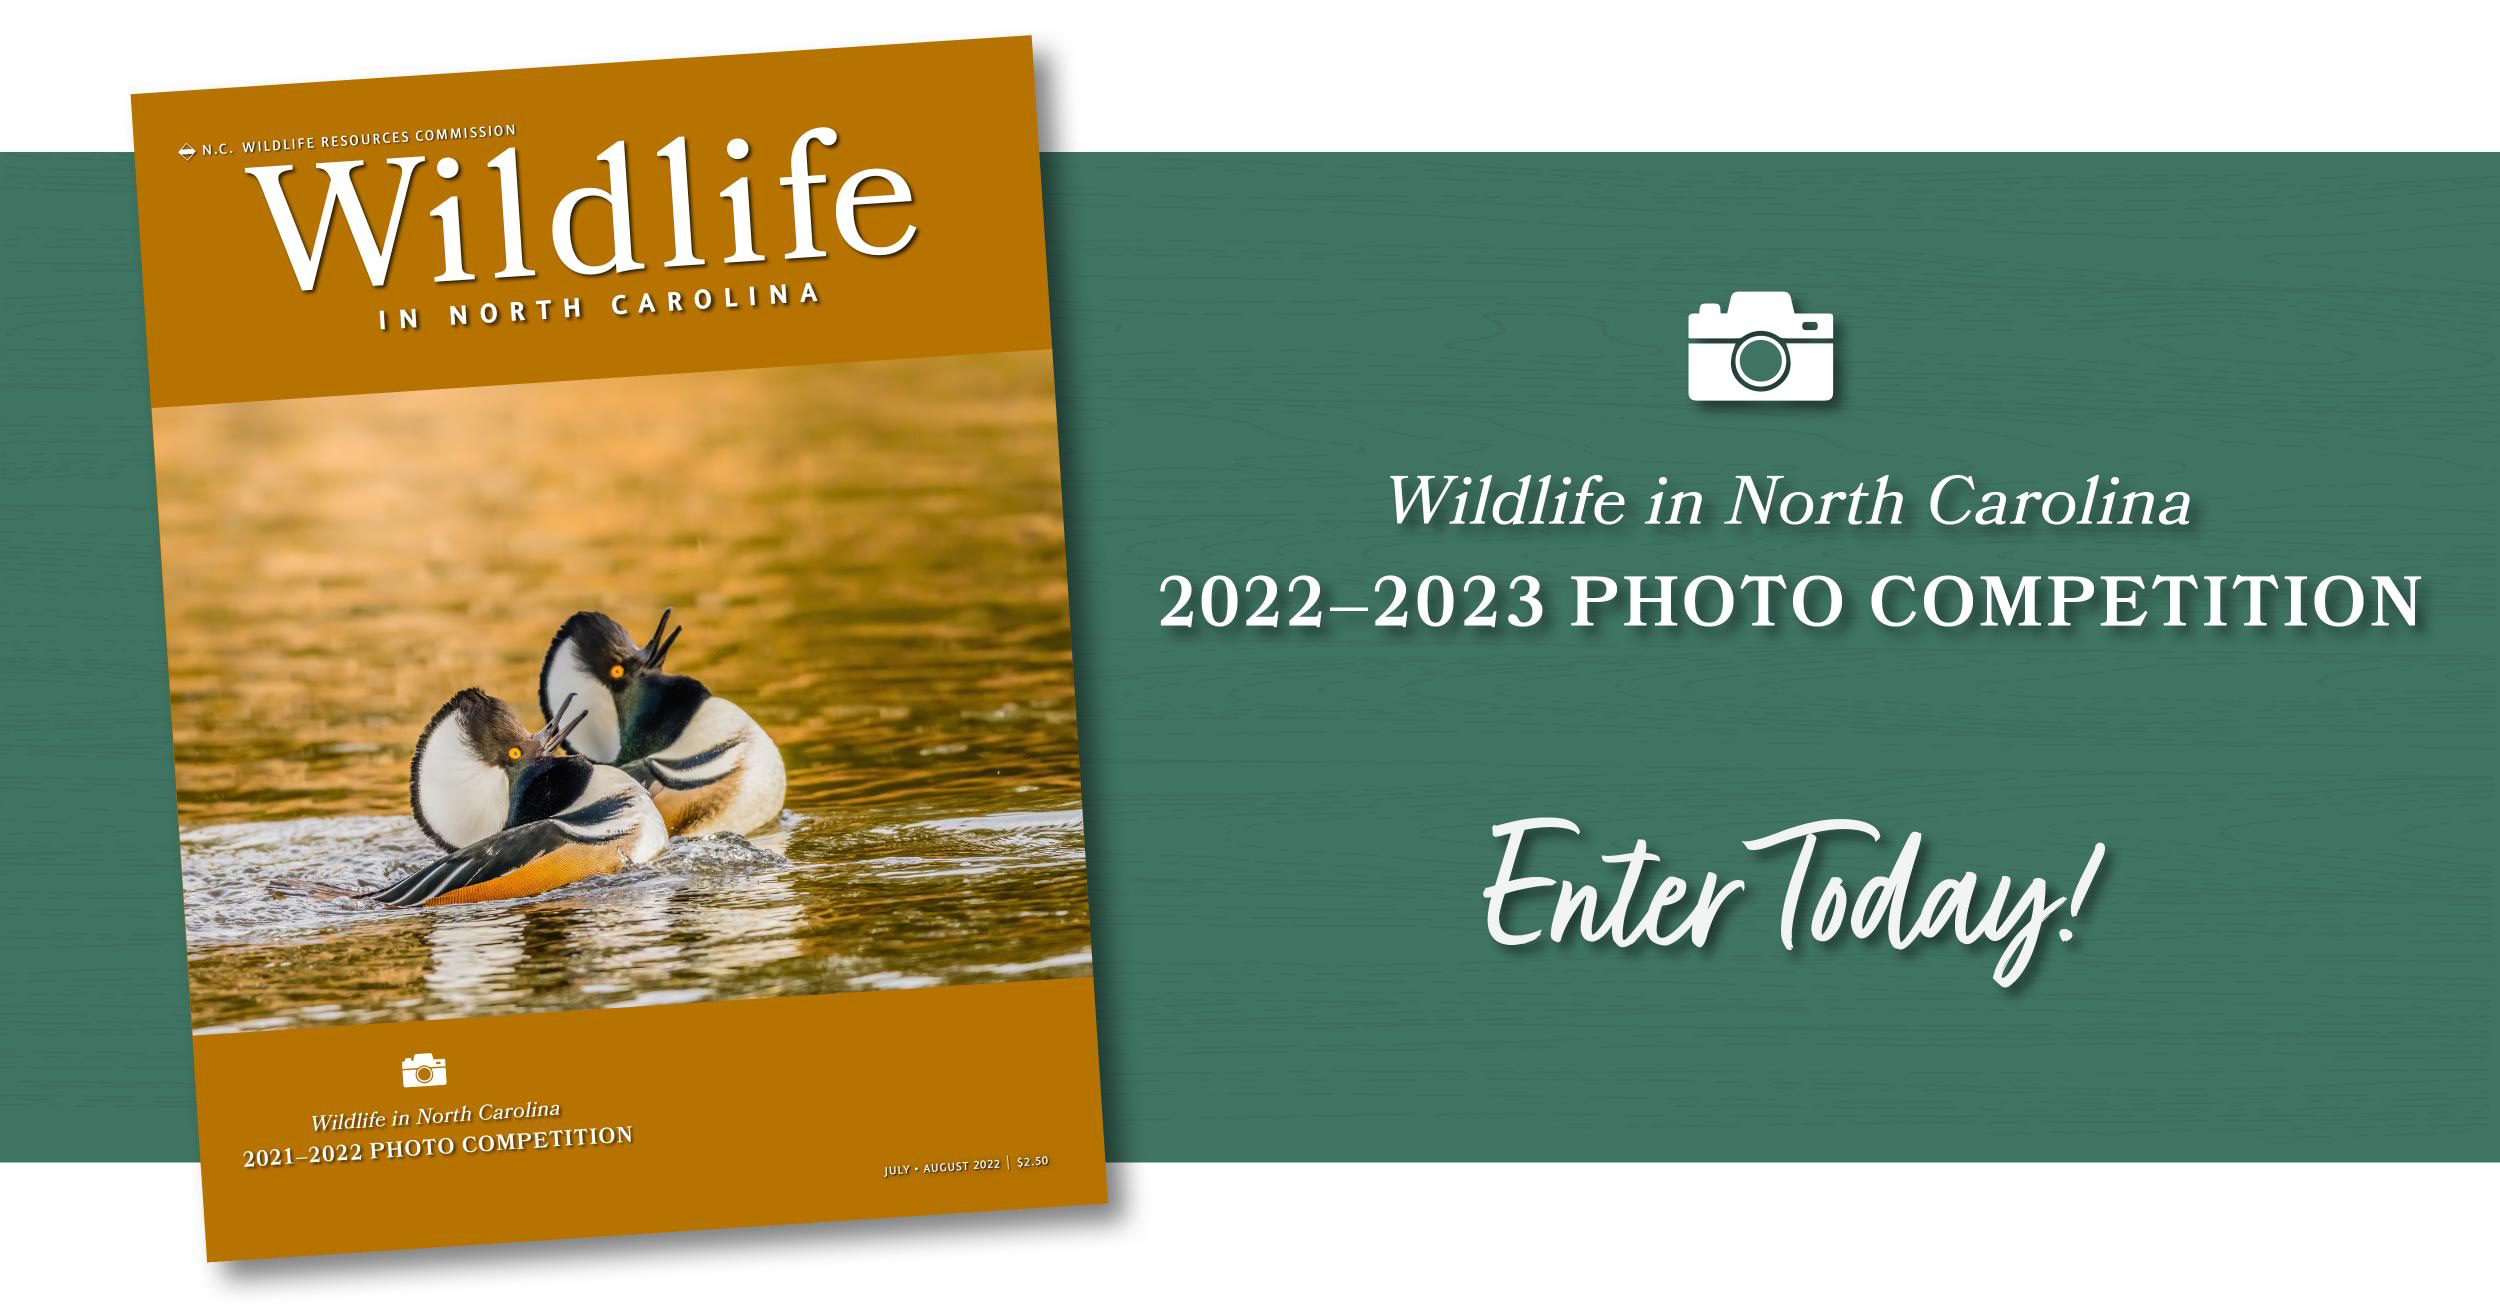 wildlife-in-north-carolina-2022-23-photo-competition-announced-n-c-wildlife-resources-commission